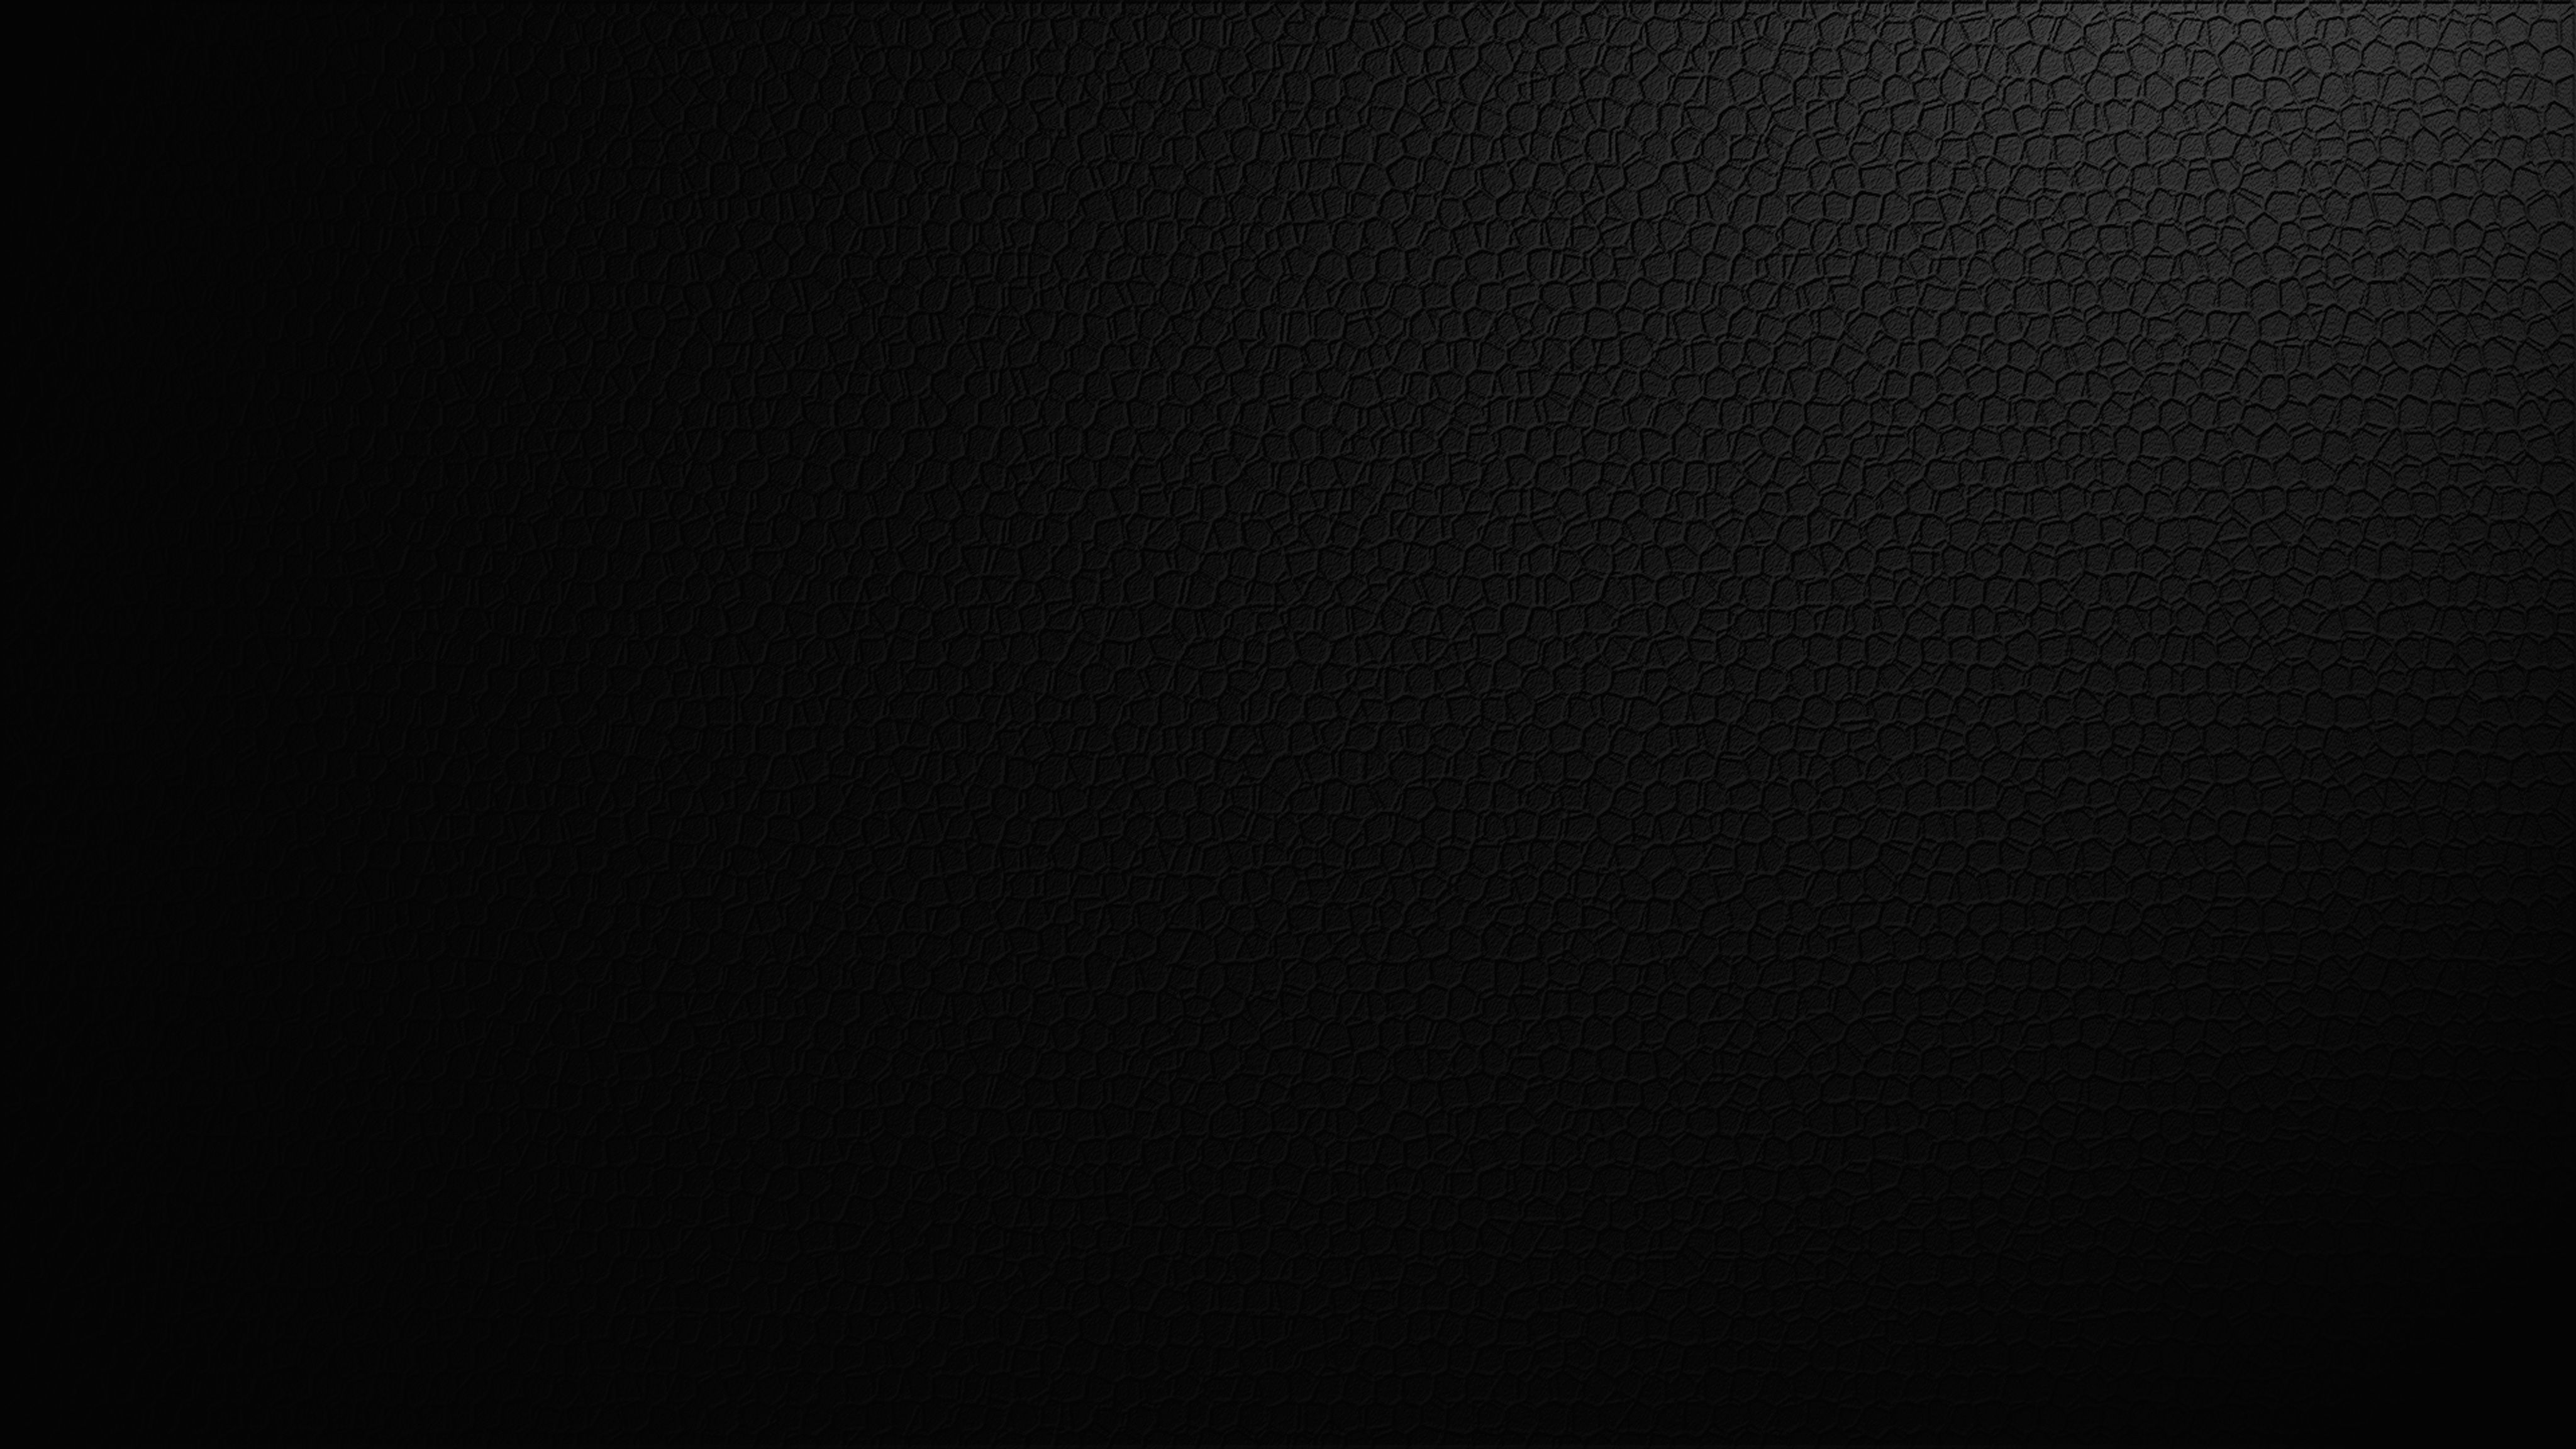 Topography Abstract Black Texture Wallpapers